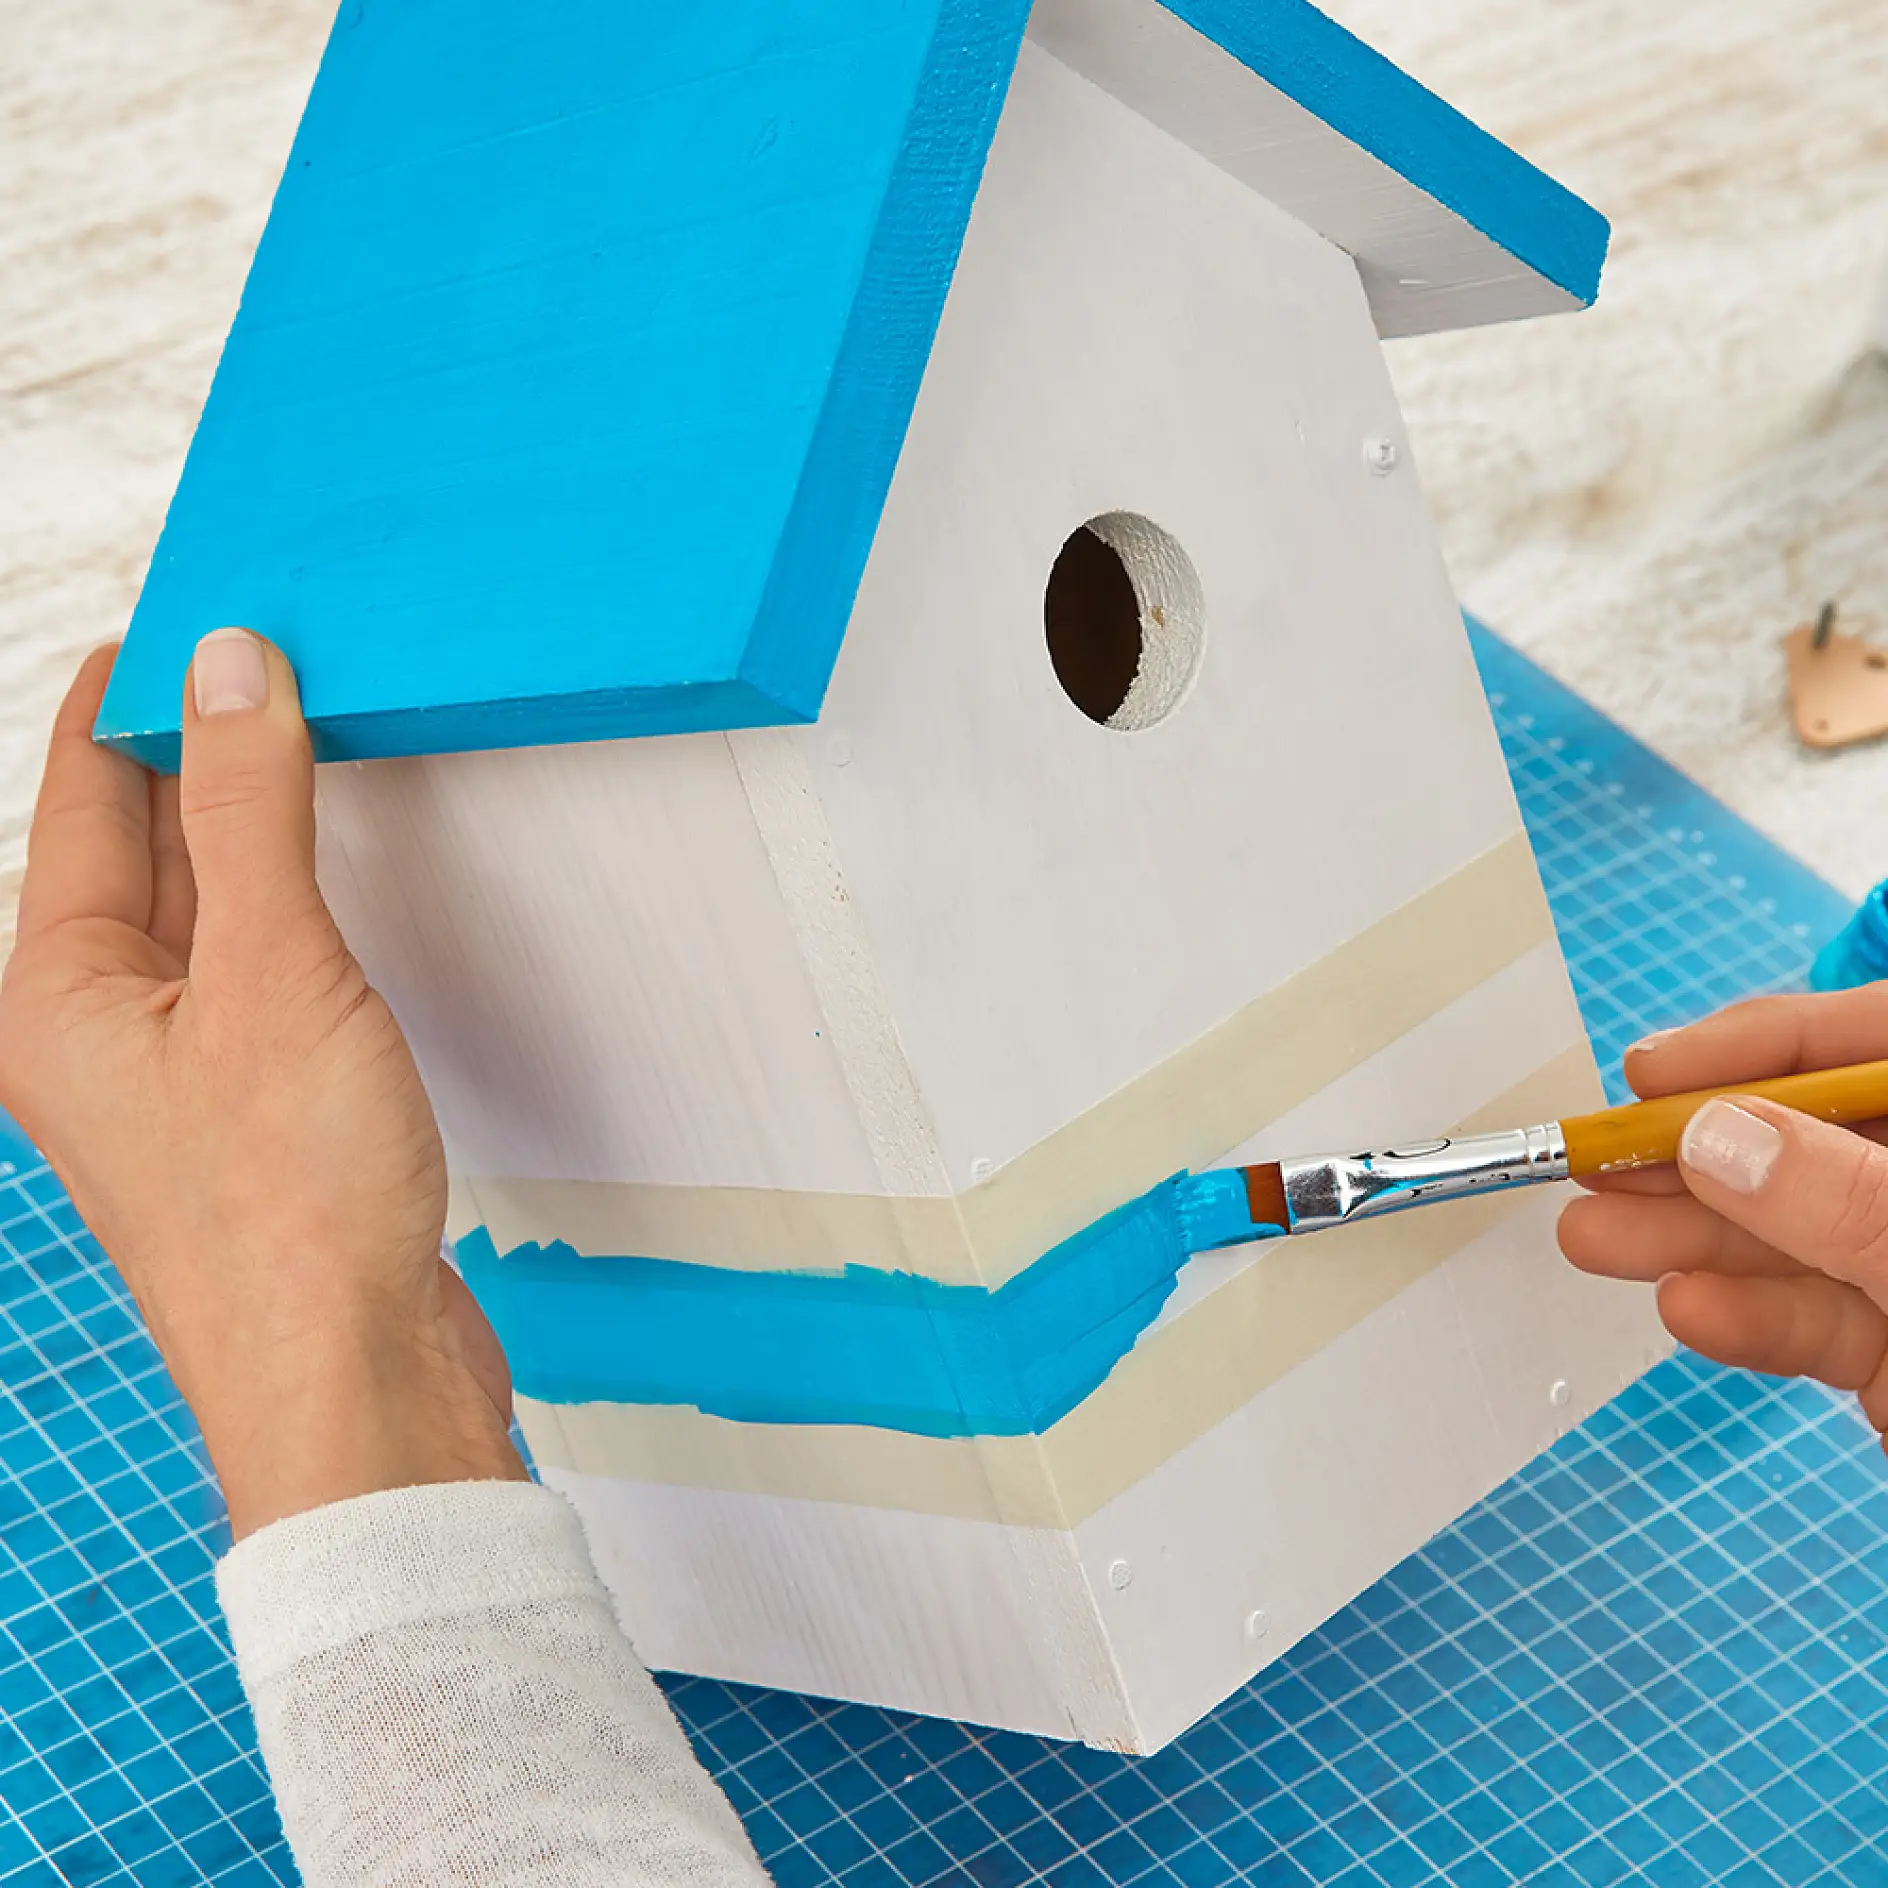 Painting a blue design while making wooden bird houses.